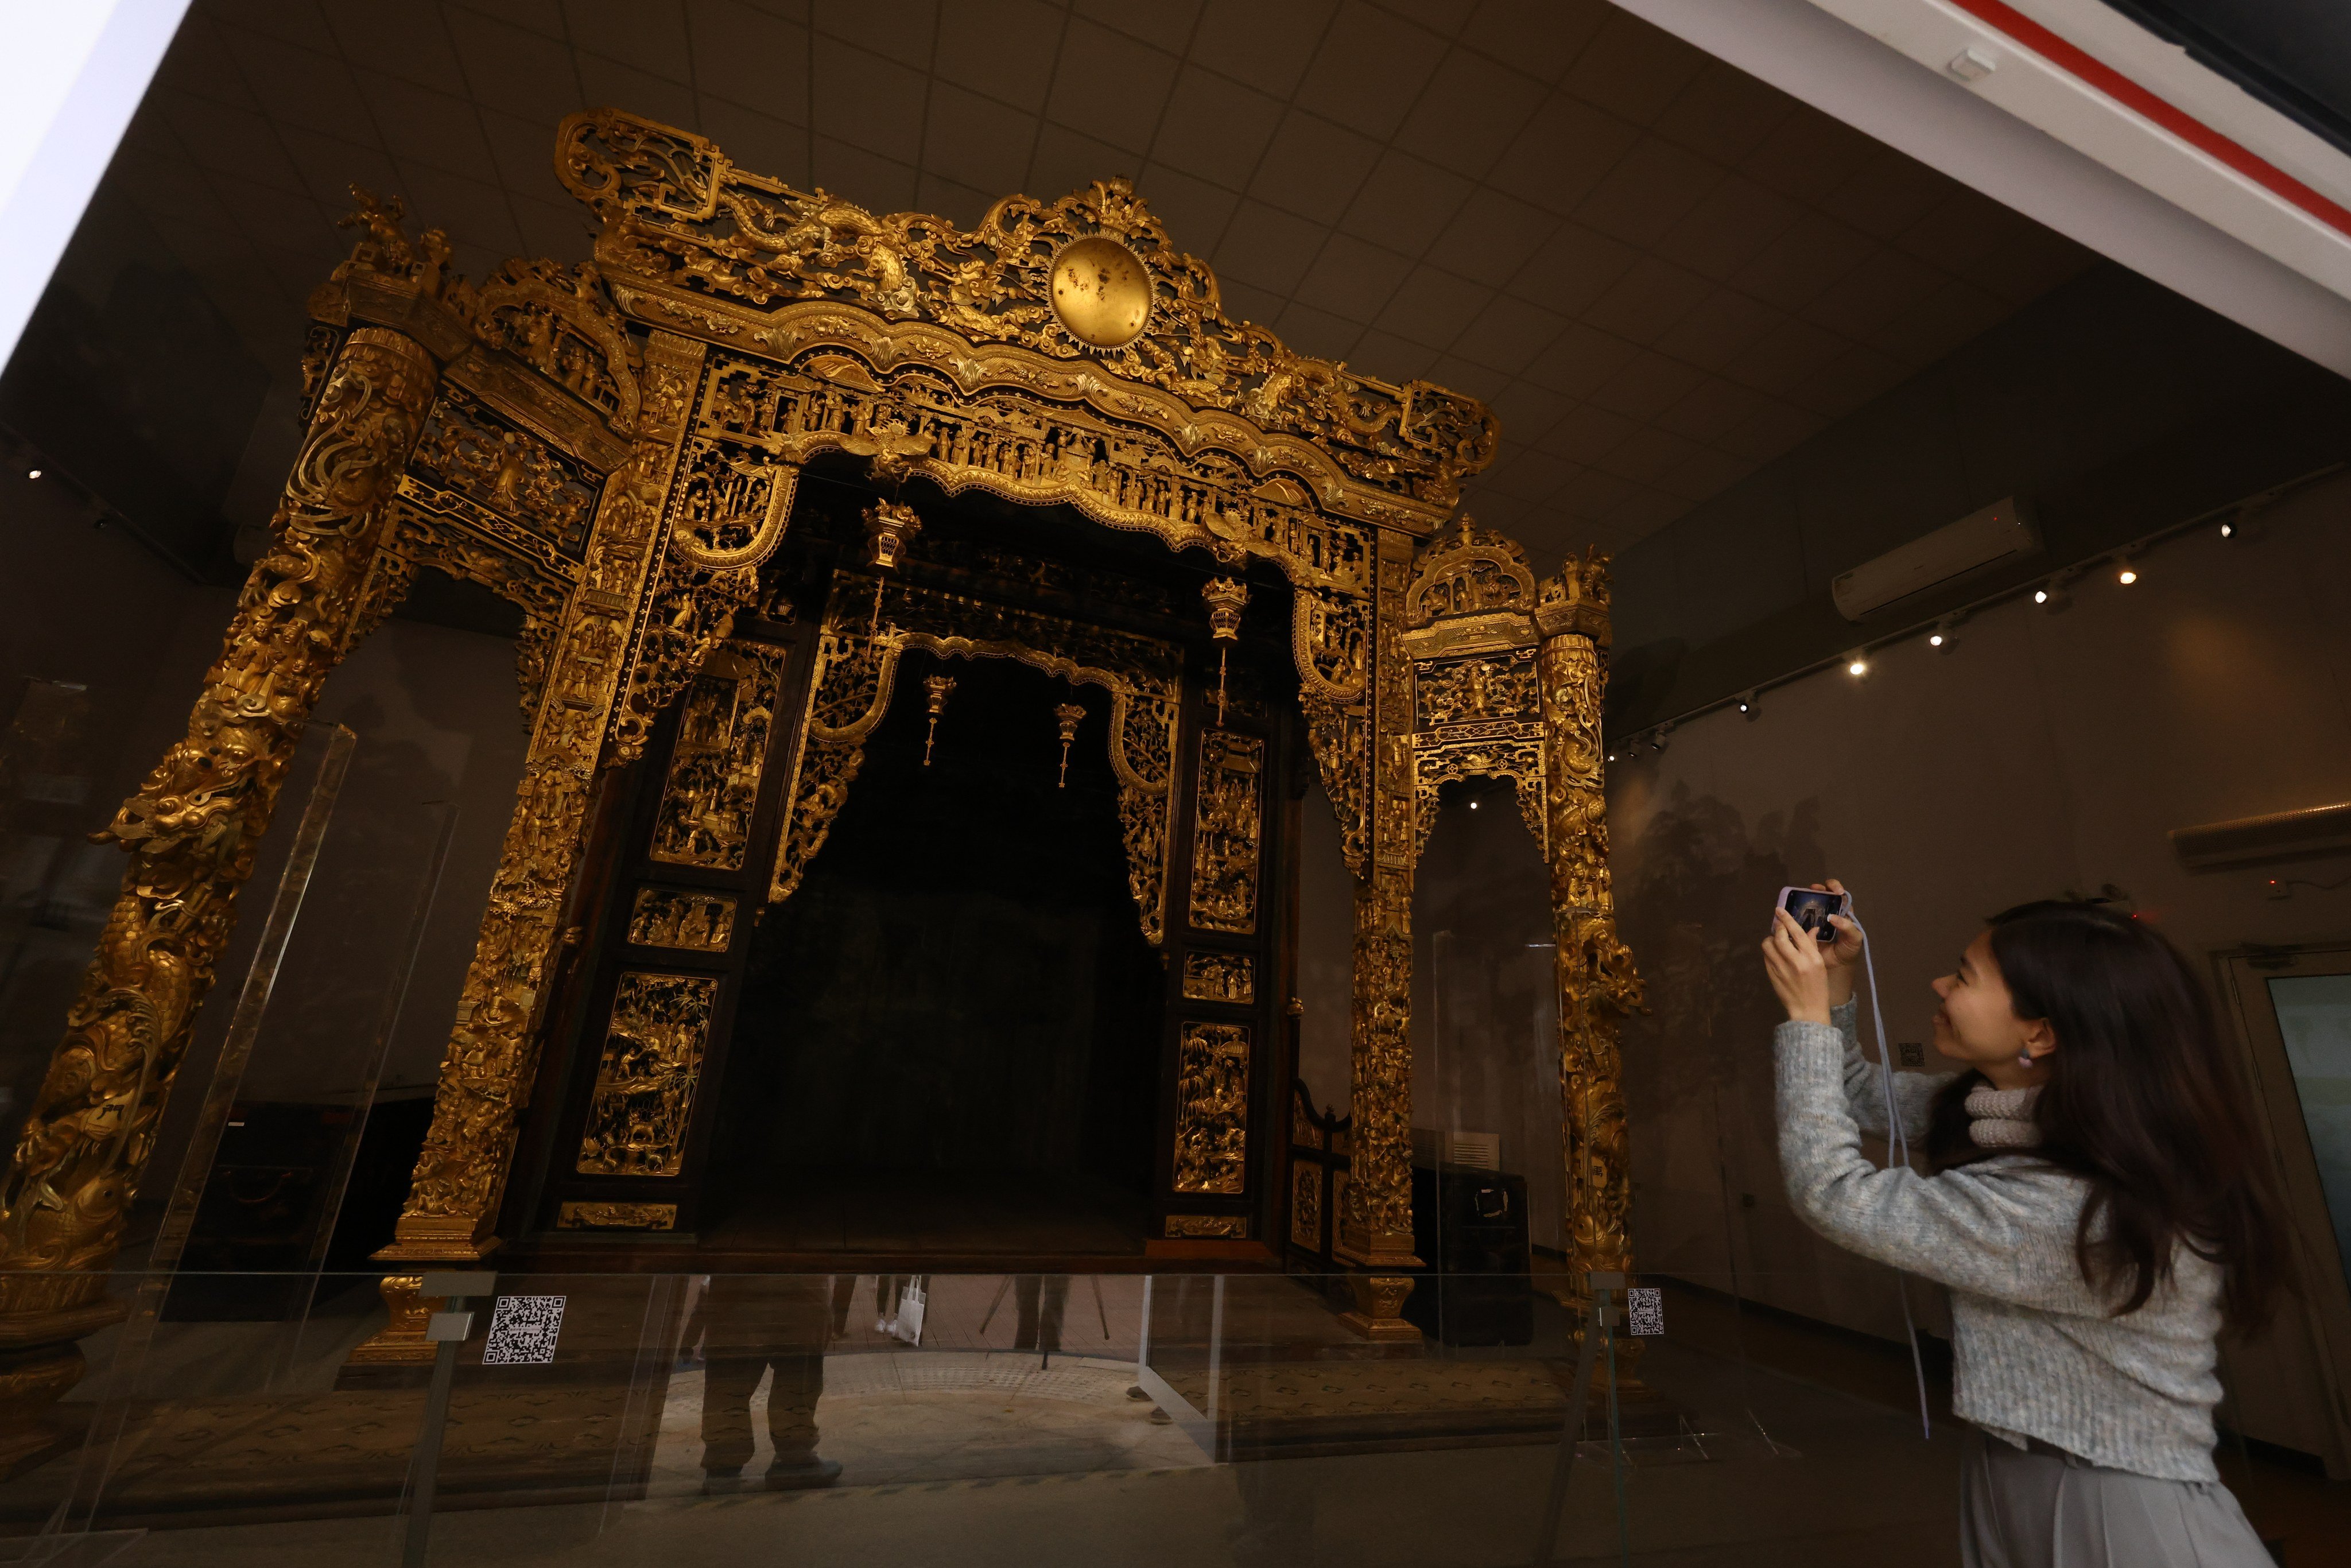 A top-grade national treasure from Guangdong province known as the Panyu shrine. The century-old structure is one of many historic pieces on display until June 2. Photo: May Tse